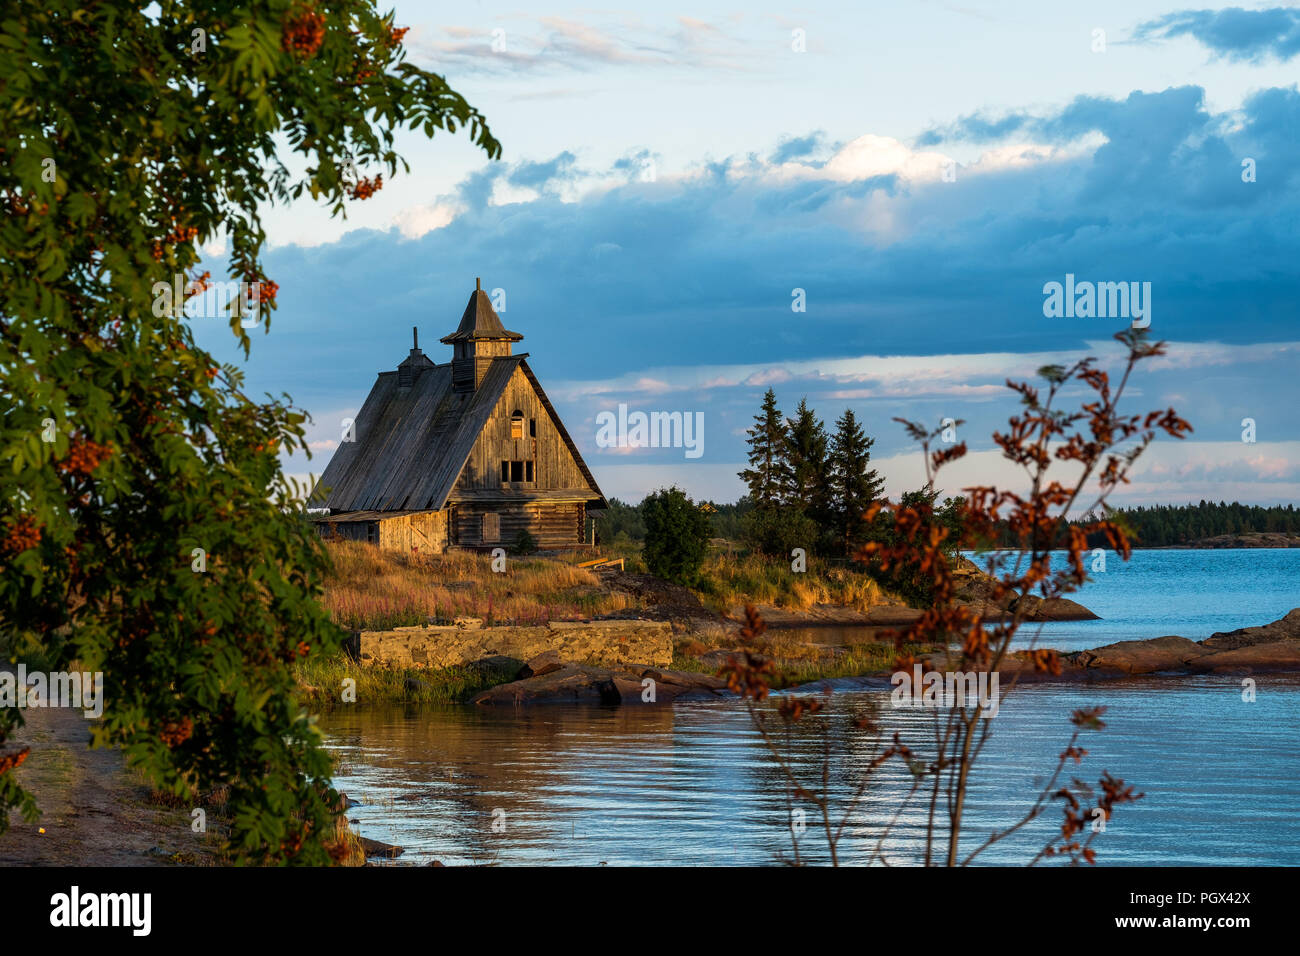 Old russian Orthodox wooden church in the village Rabocheostrovsk, Karelia. Stock Photo